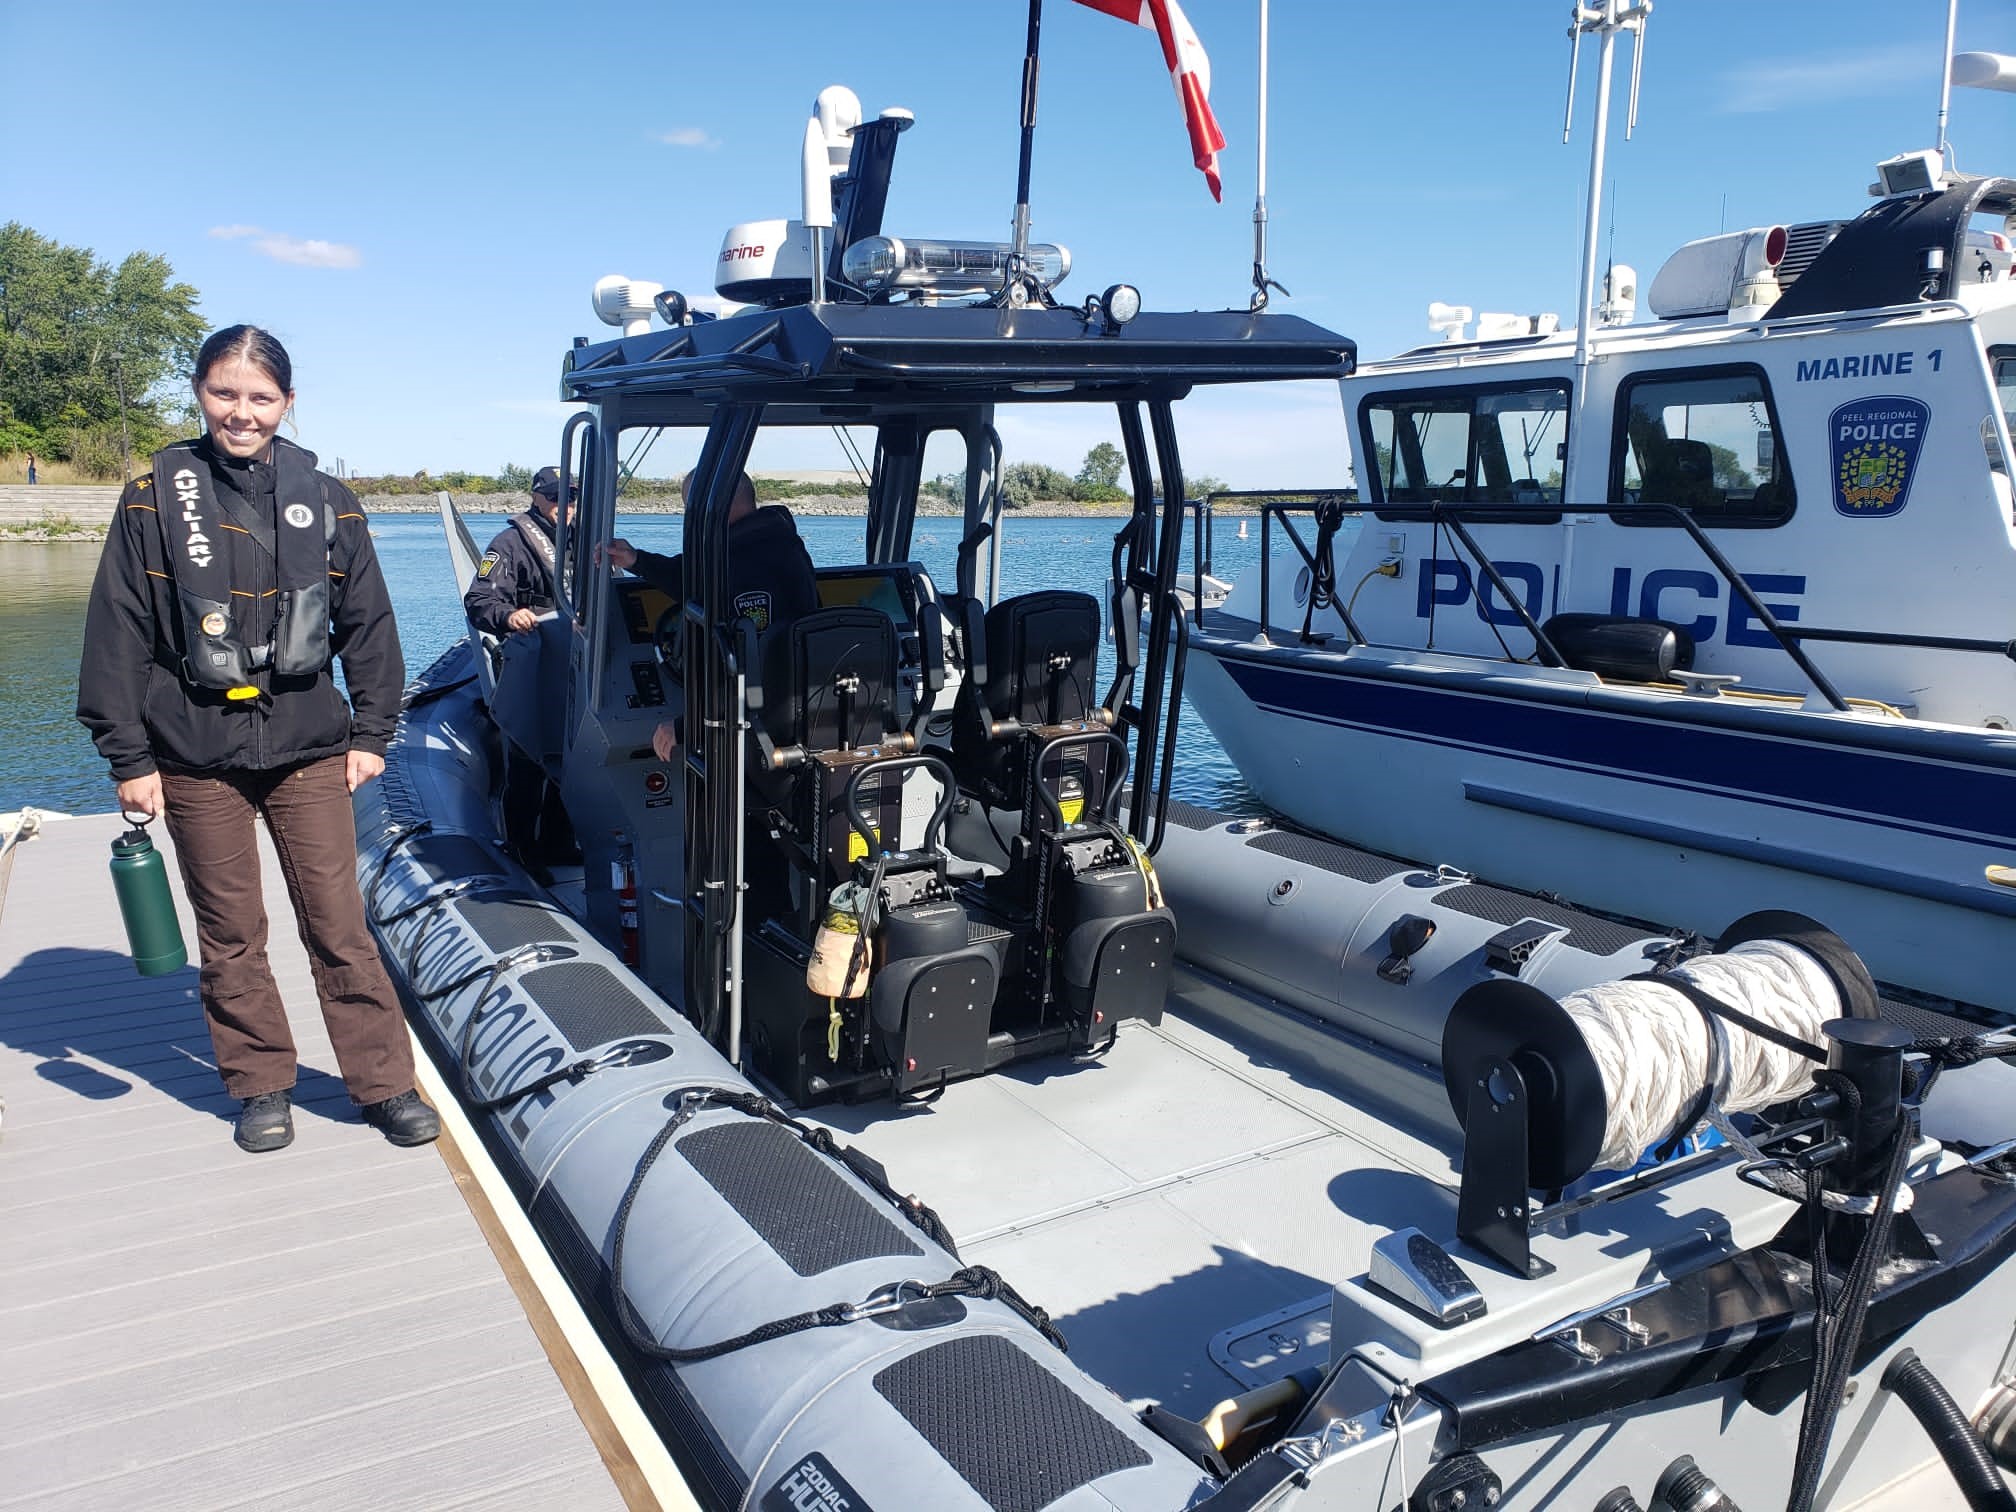 Nollner on the dock with the Peel Police Police boat 